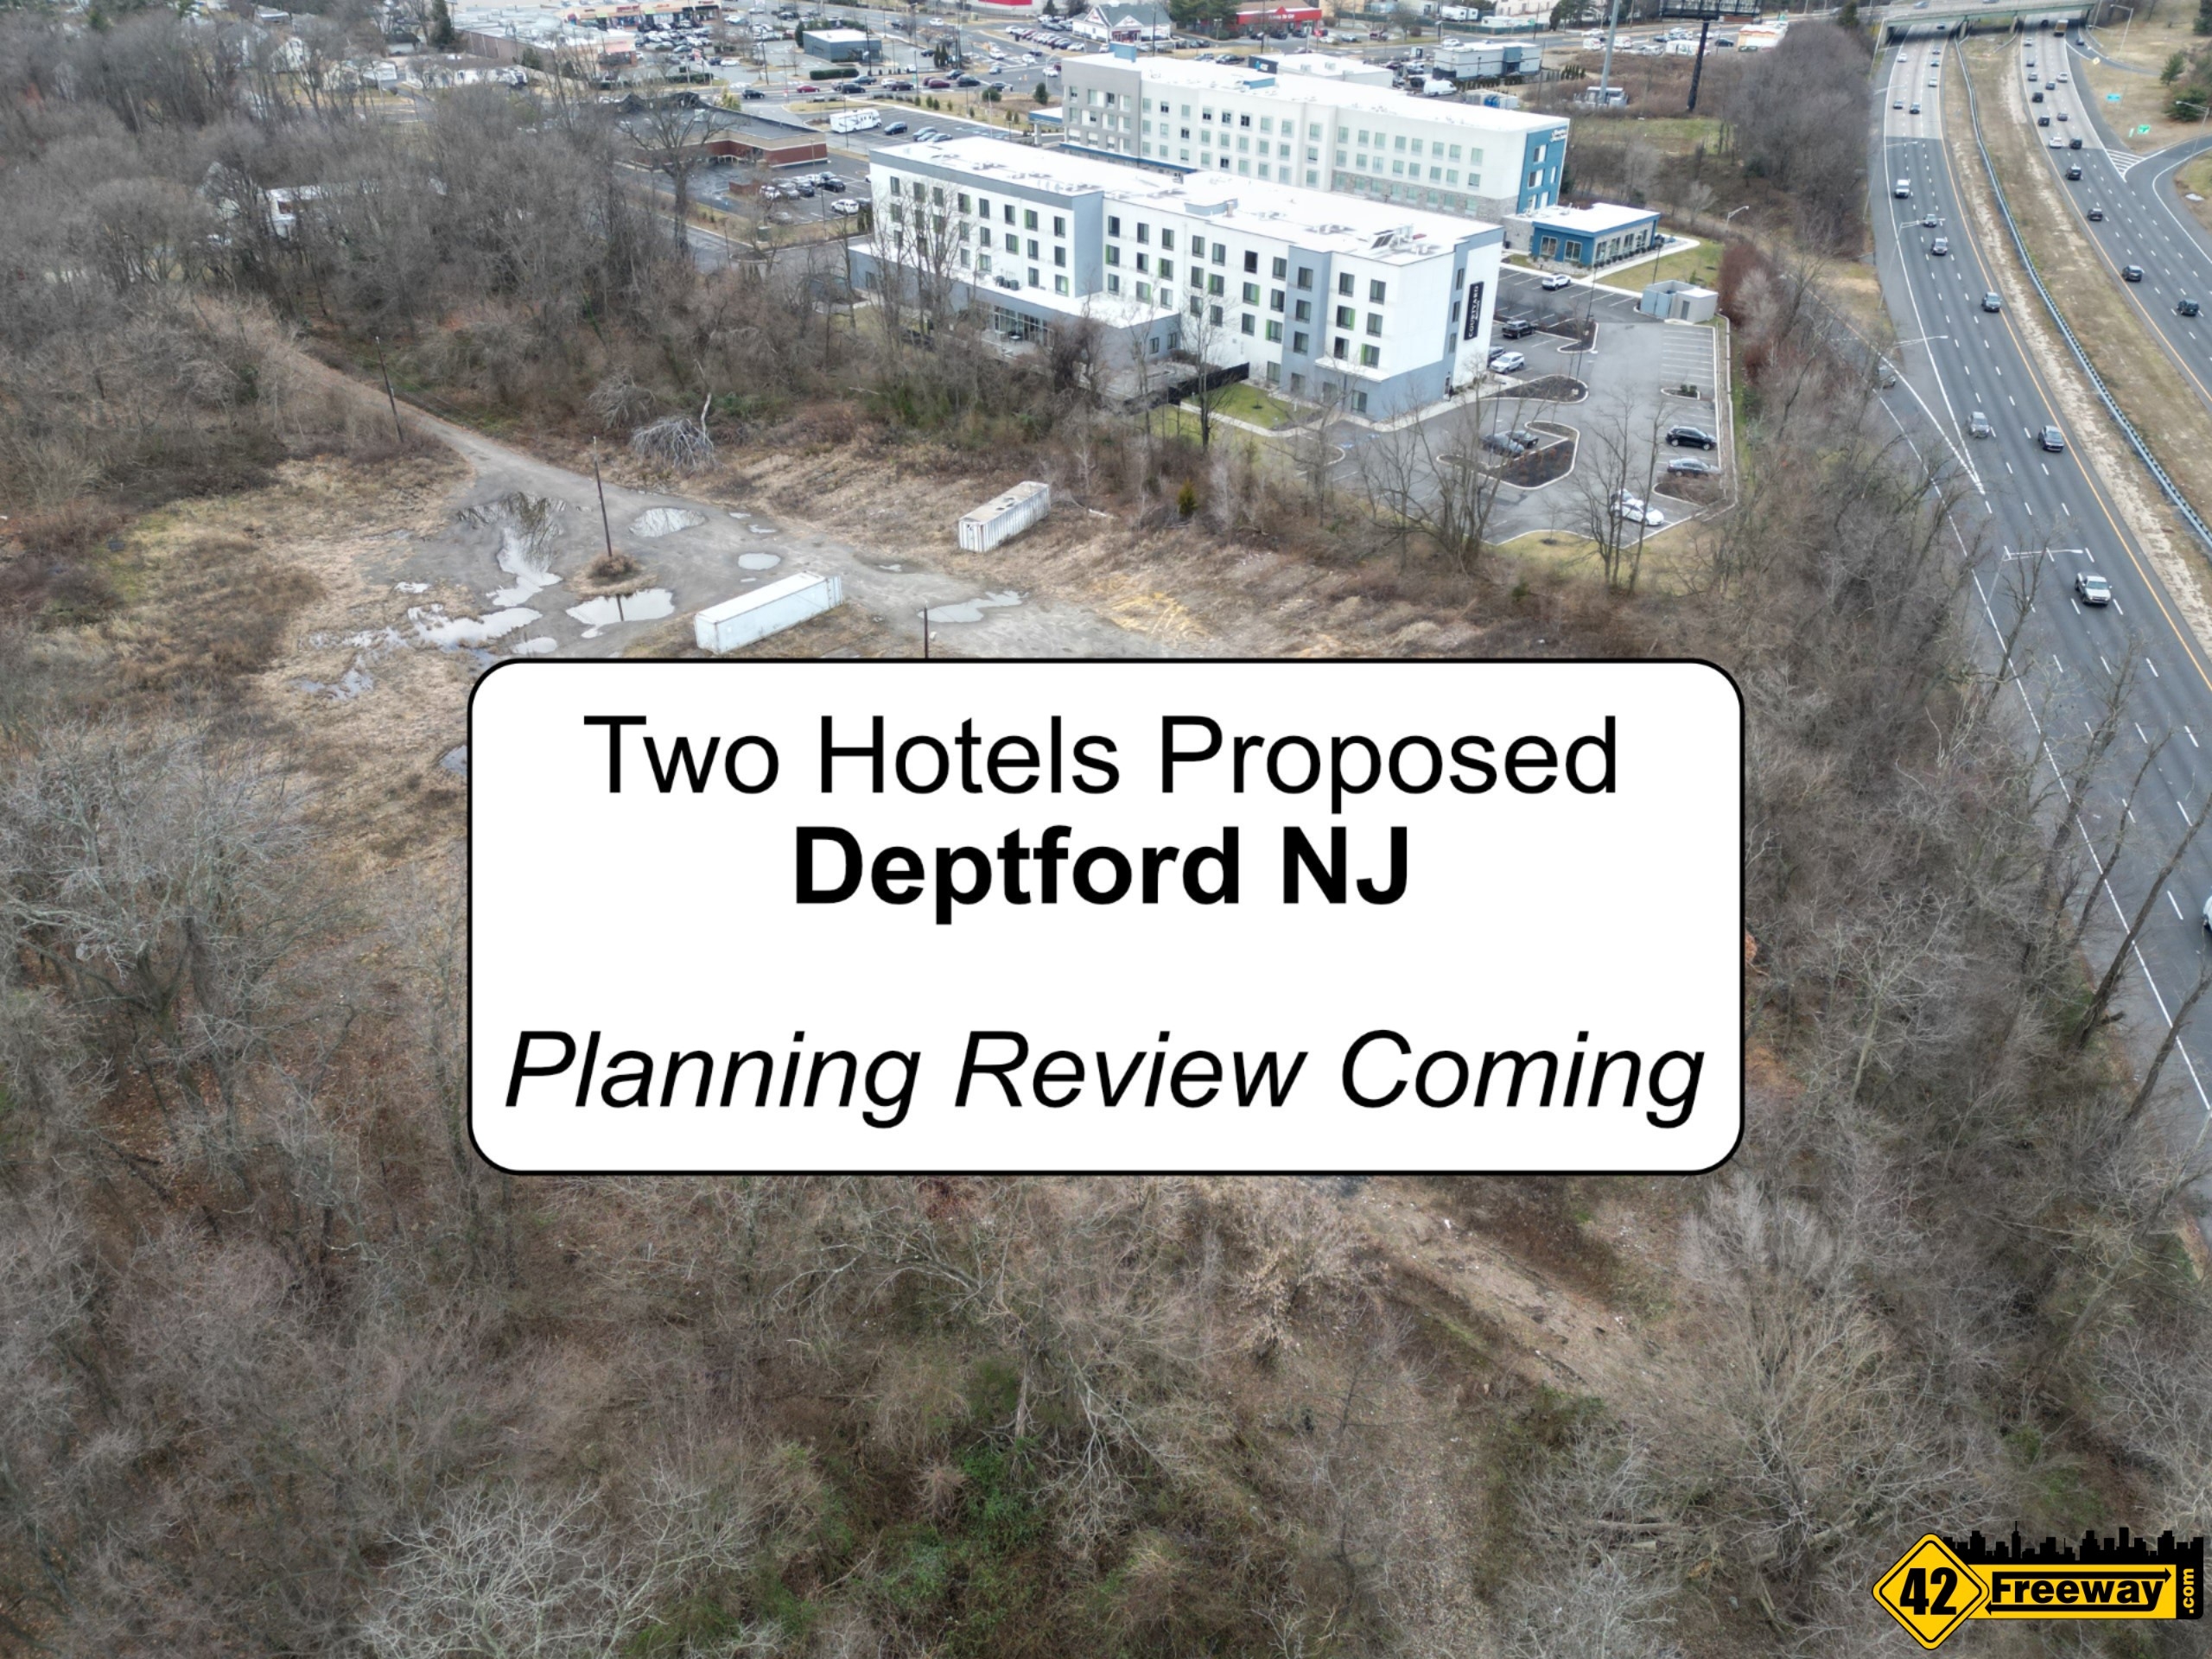 Two New Hotels Proposed For Deptford Route 41 Head to Planning